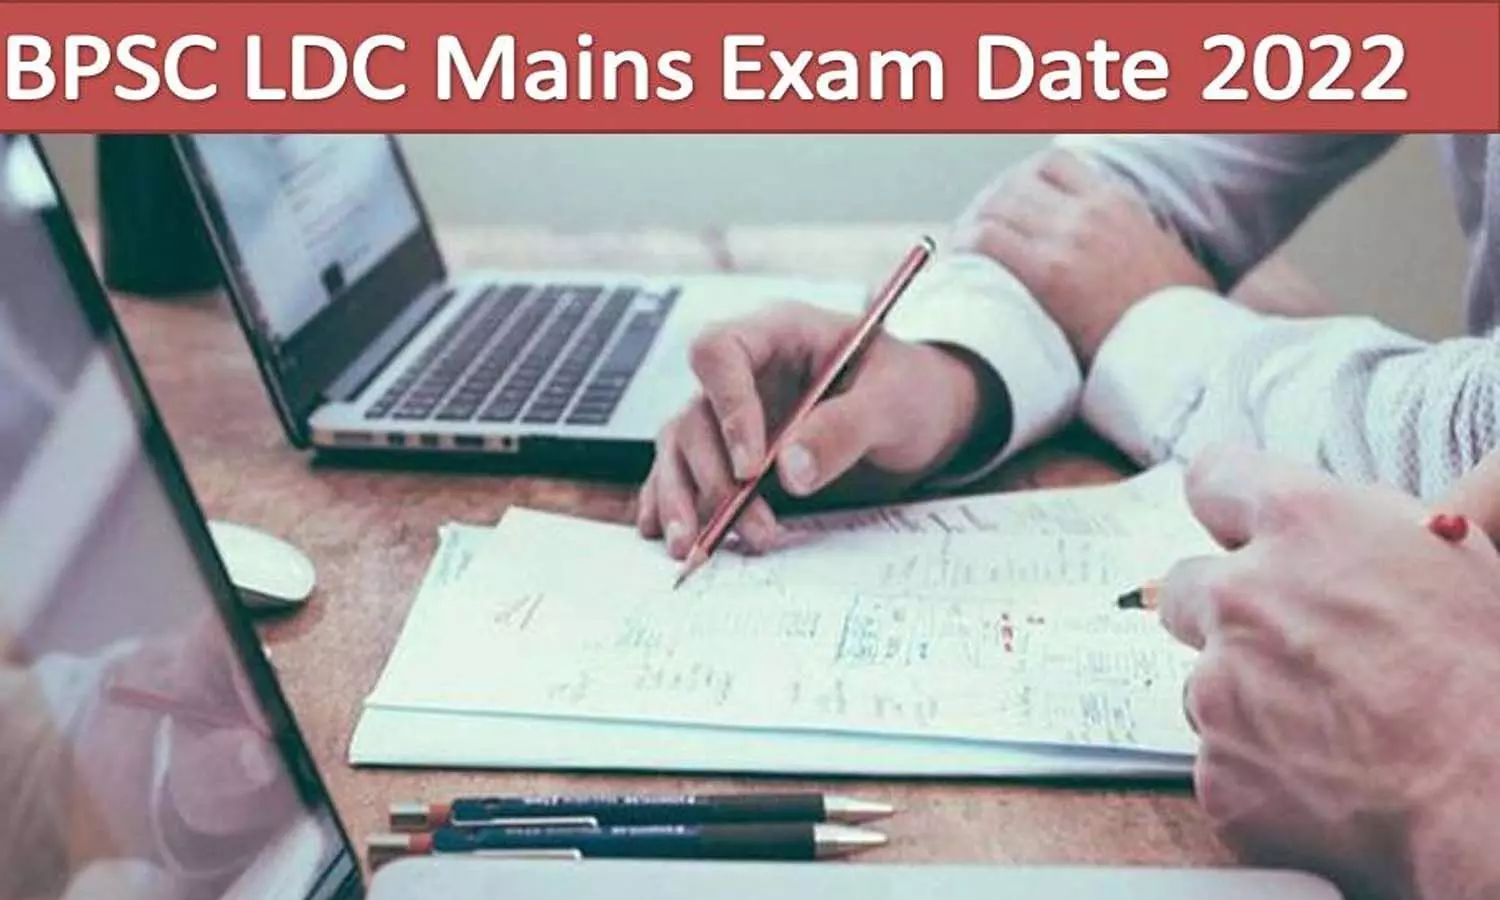 Attention students preparing for BPSC exam, this exam will be held on November 20, read full news